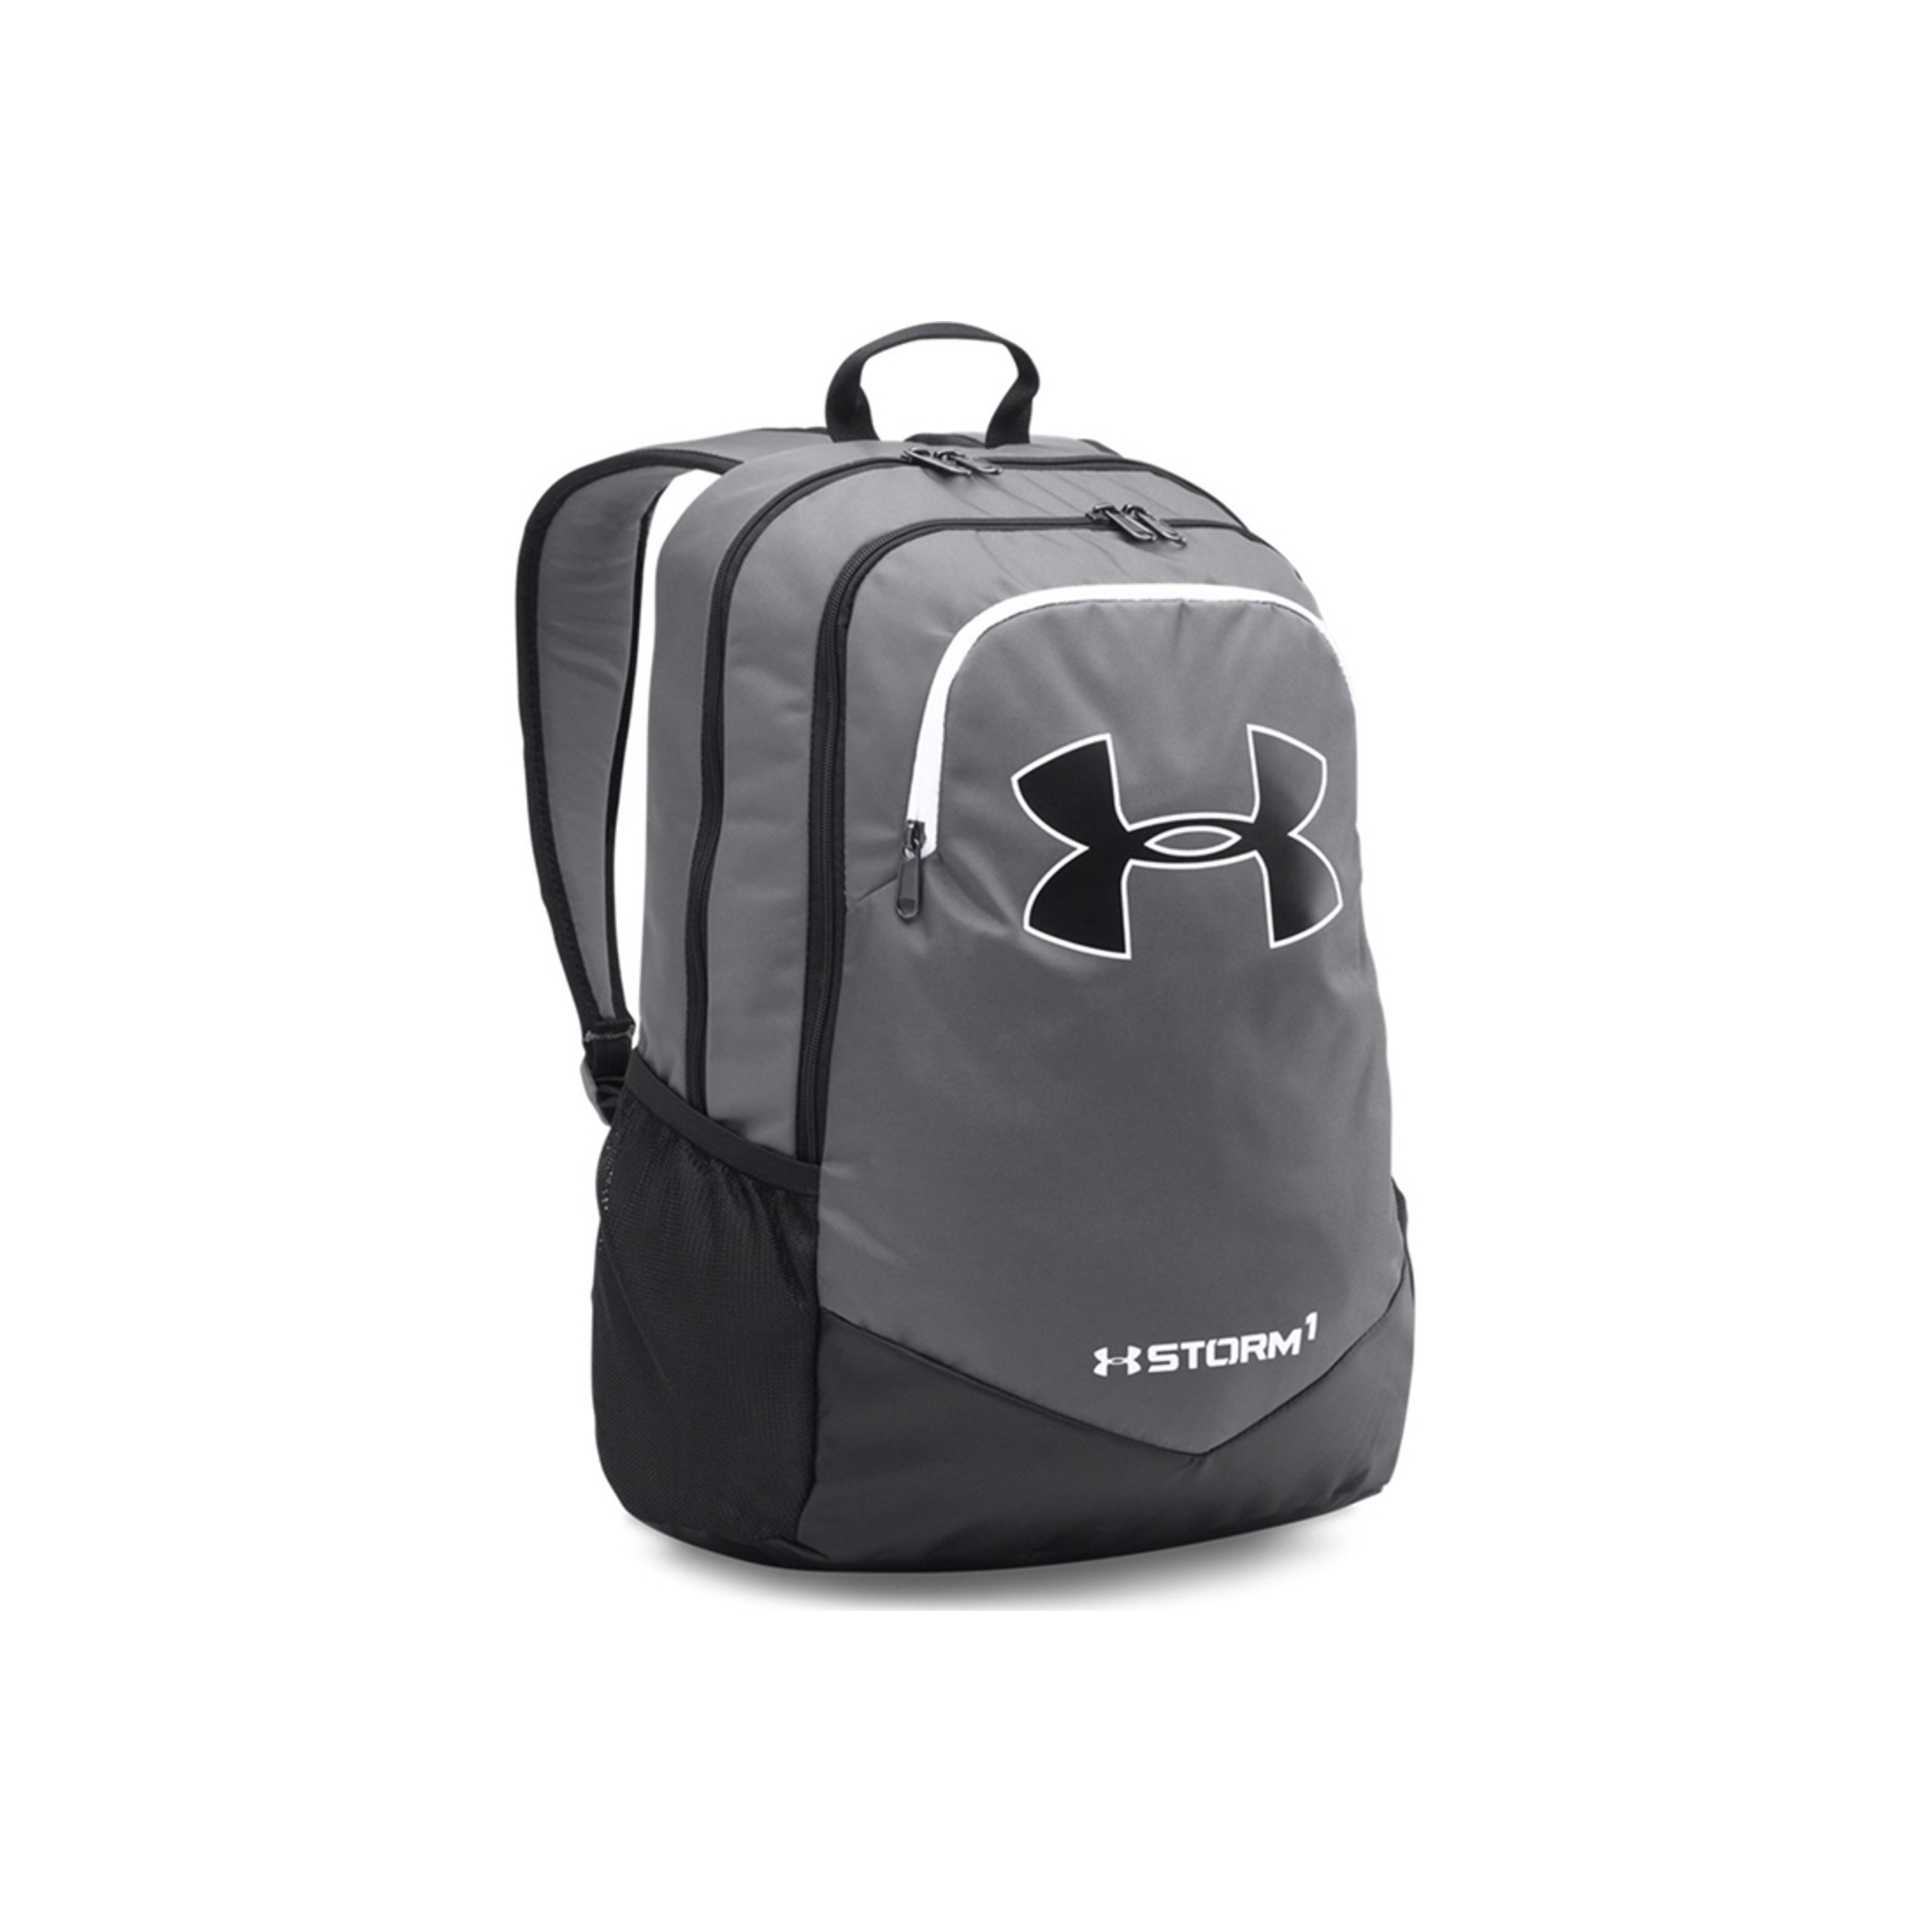 Under Armour Scrimmage Backpack 1277422-040